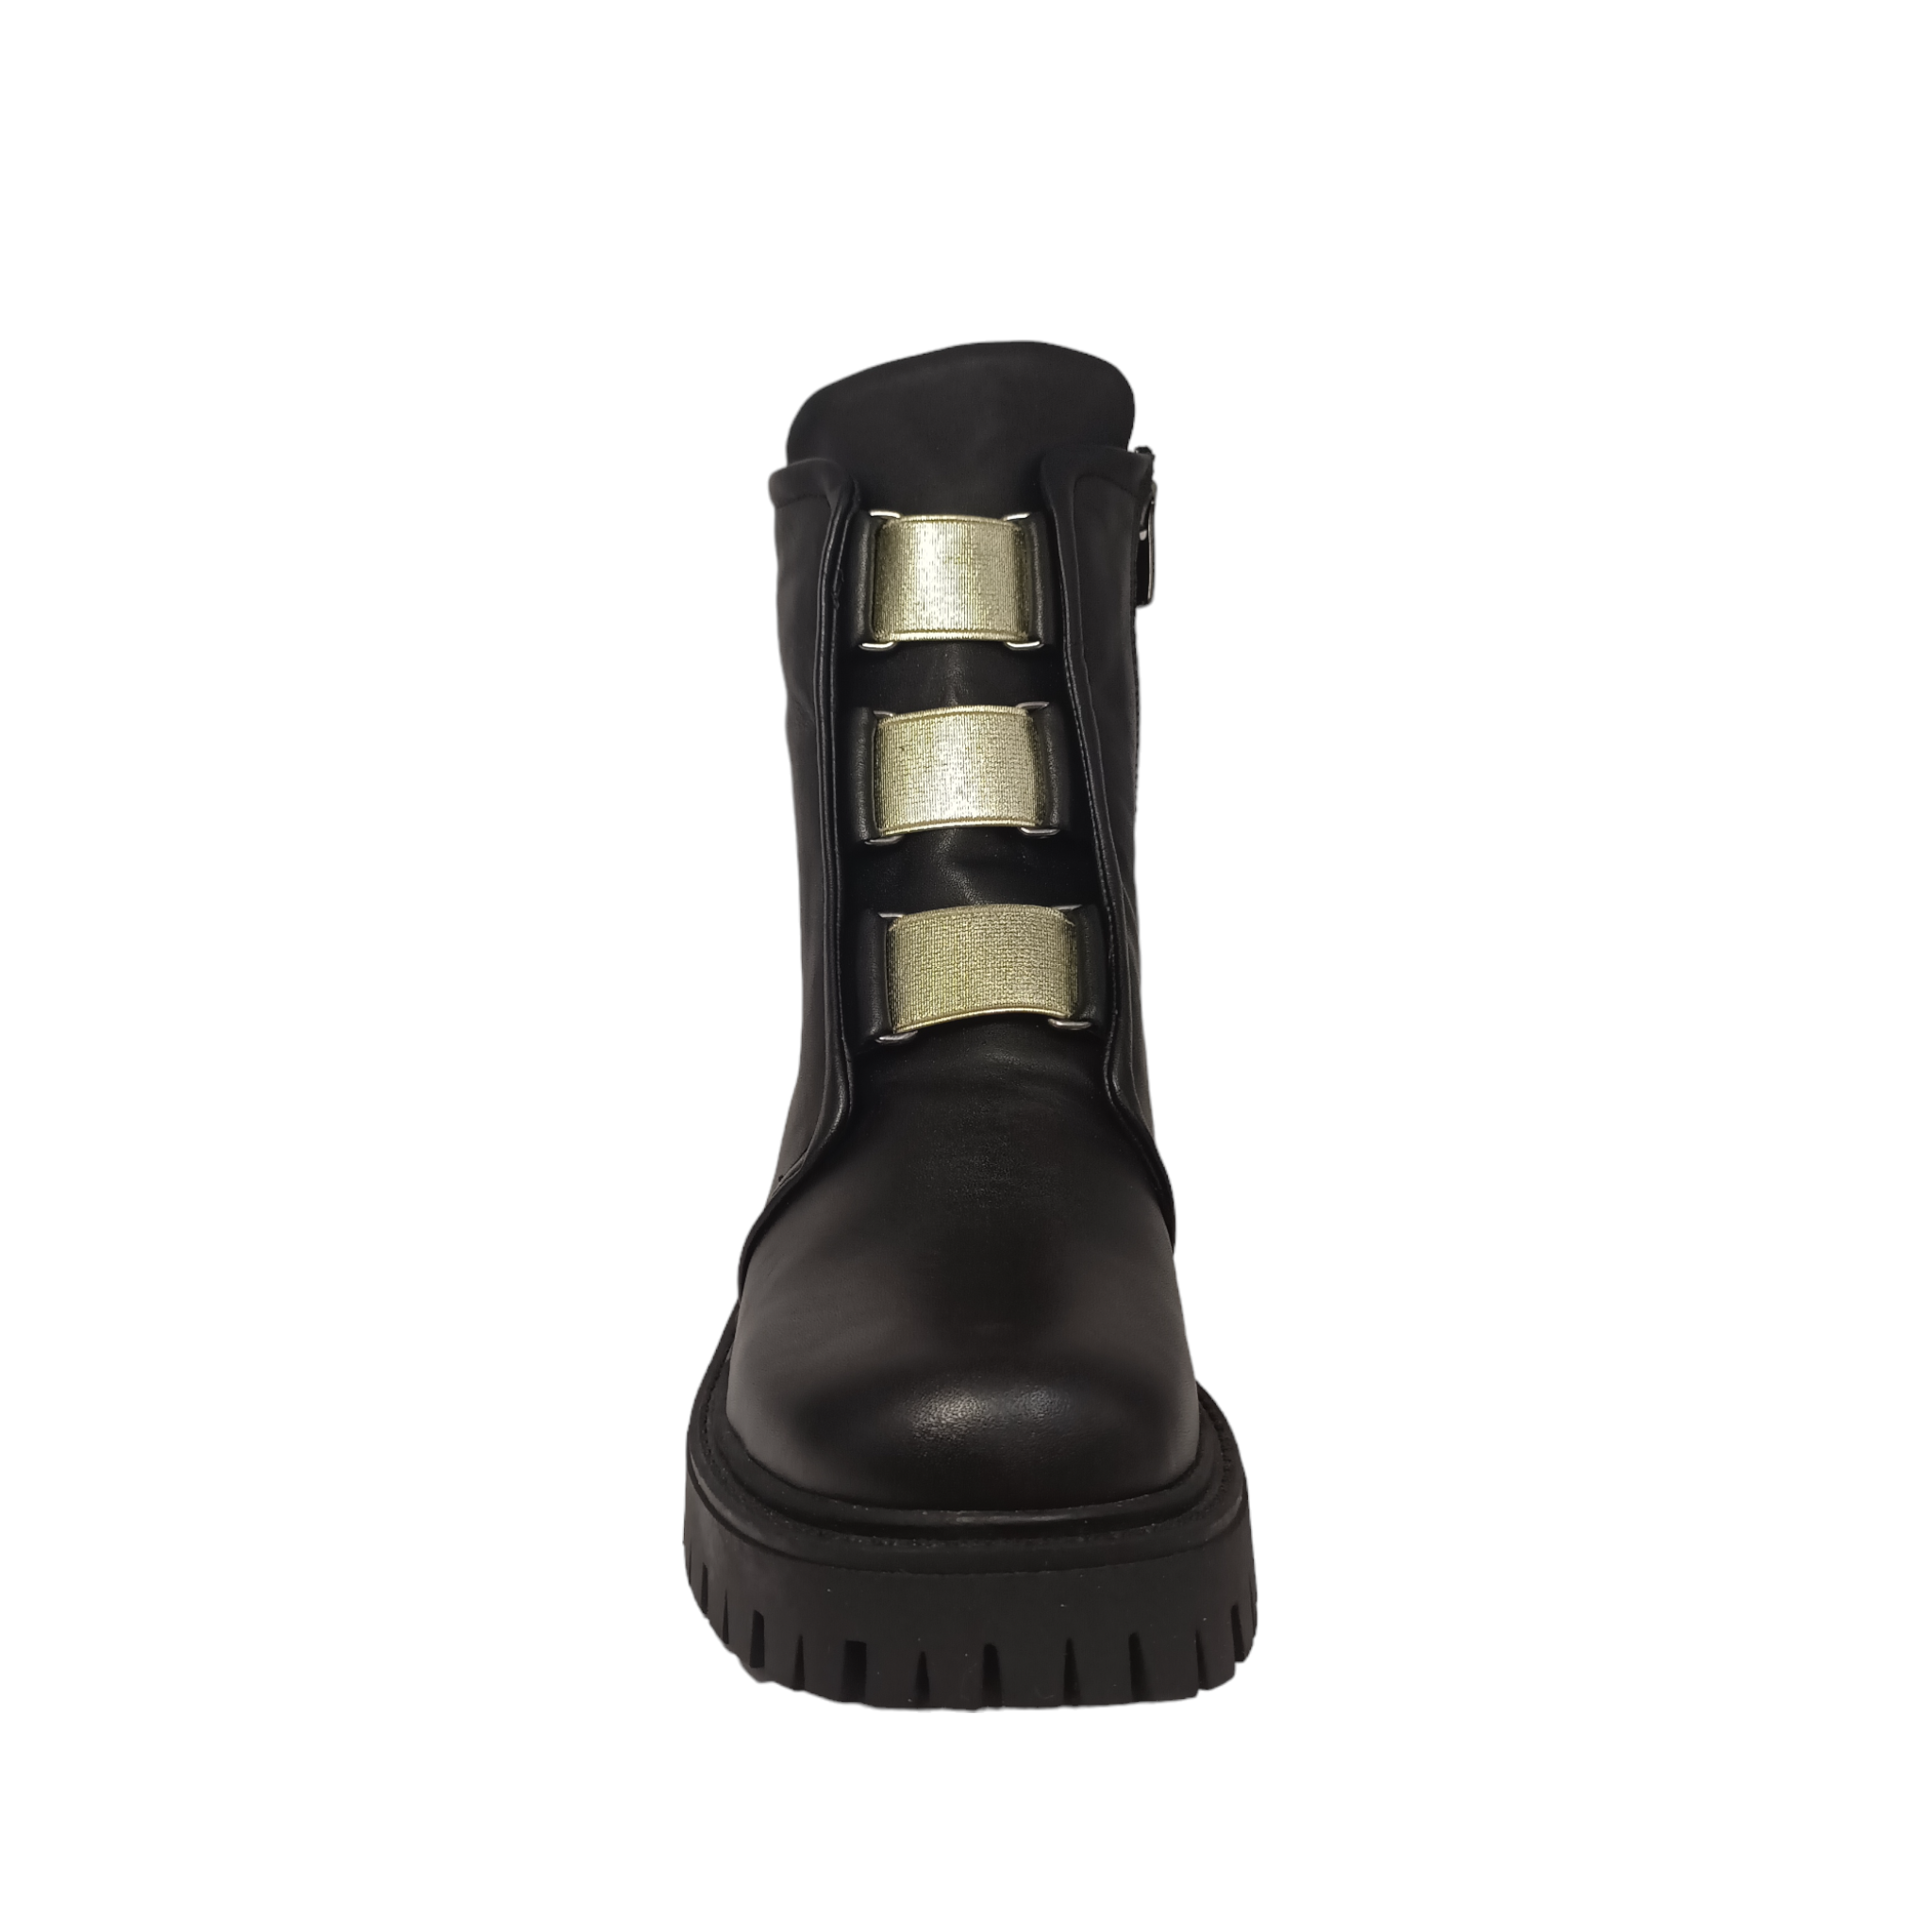 Tereta boot with metallic elastic on the front. Side angled view. Tall tongue on front of boot. Shop Online and In-store with shoe&me